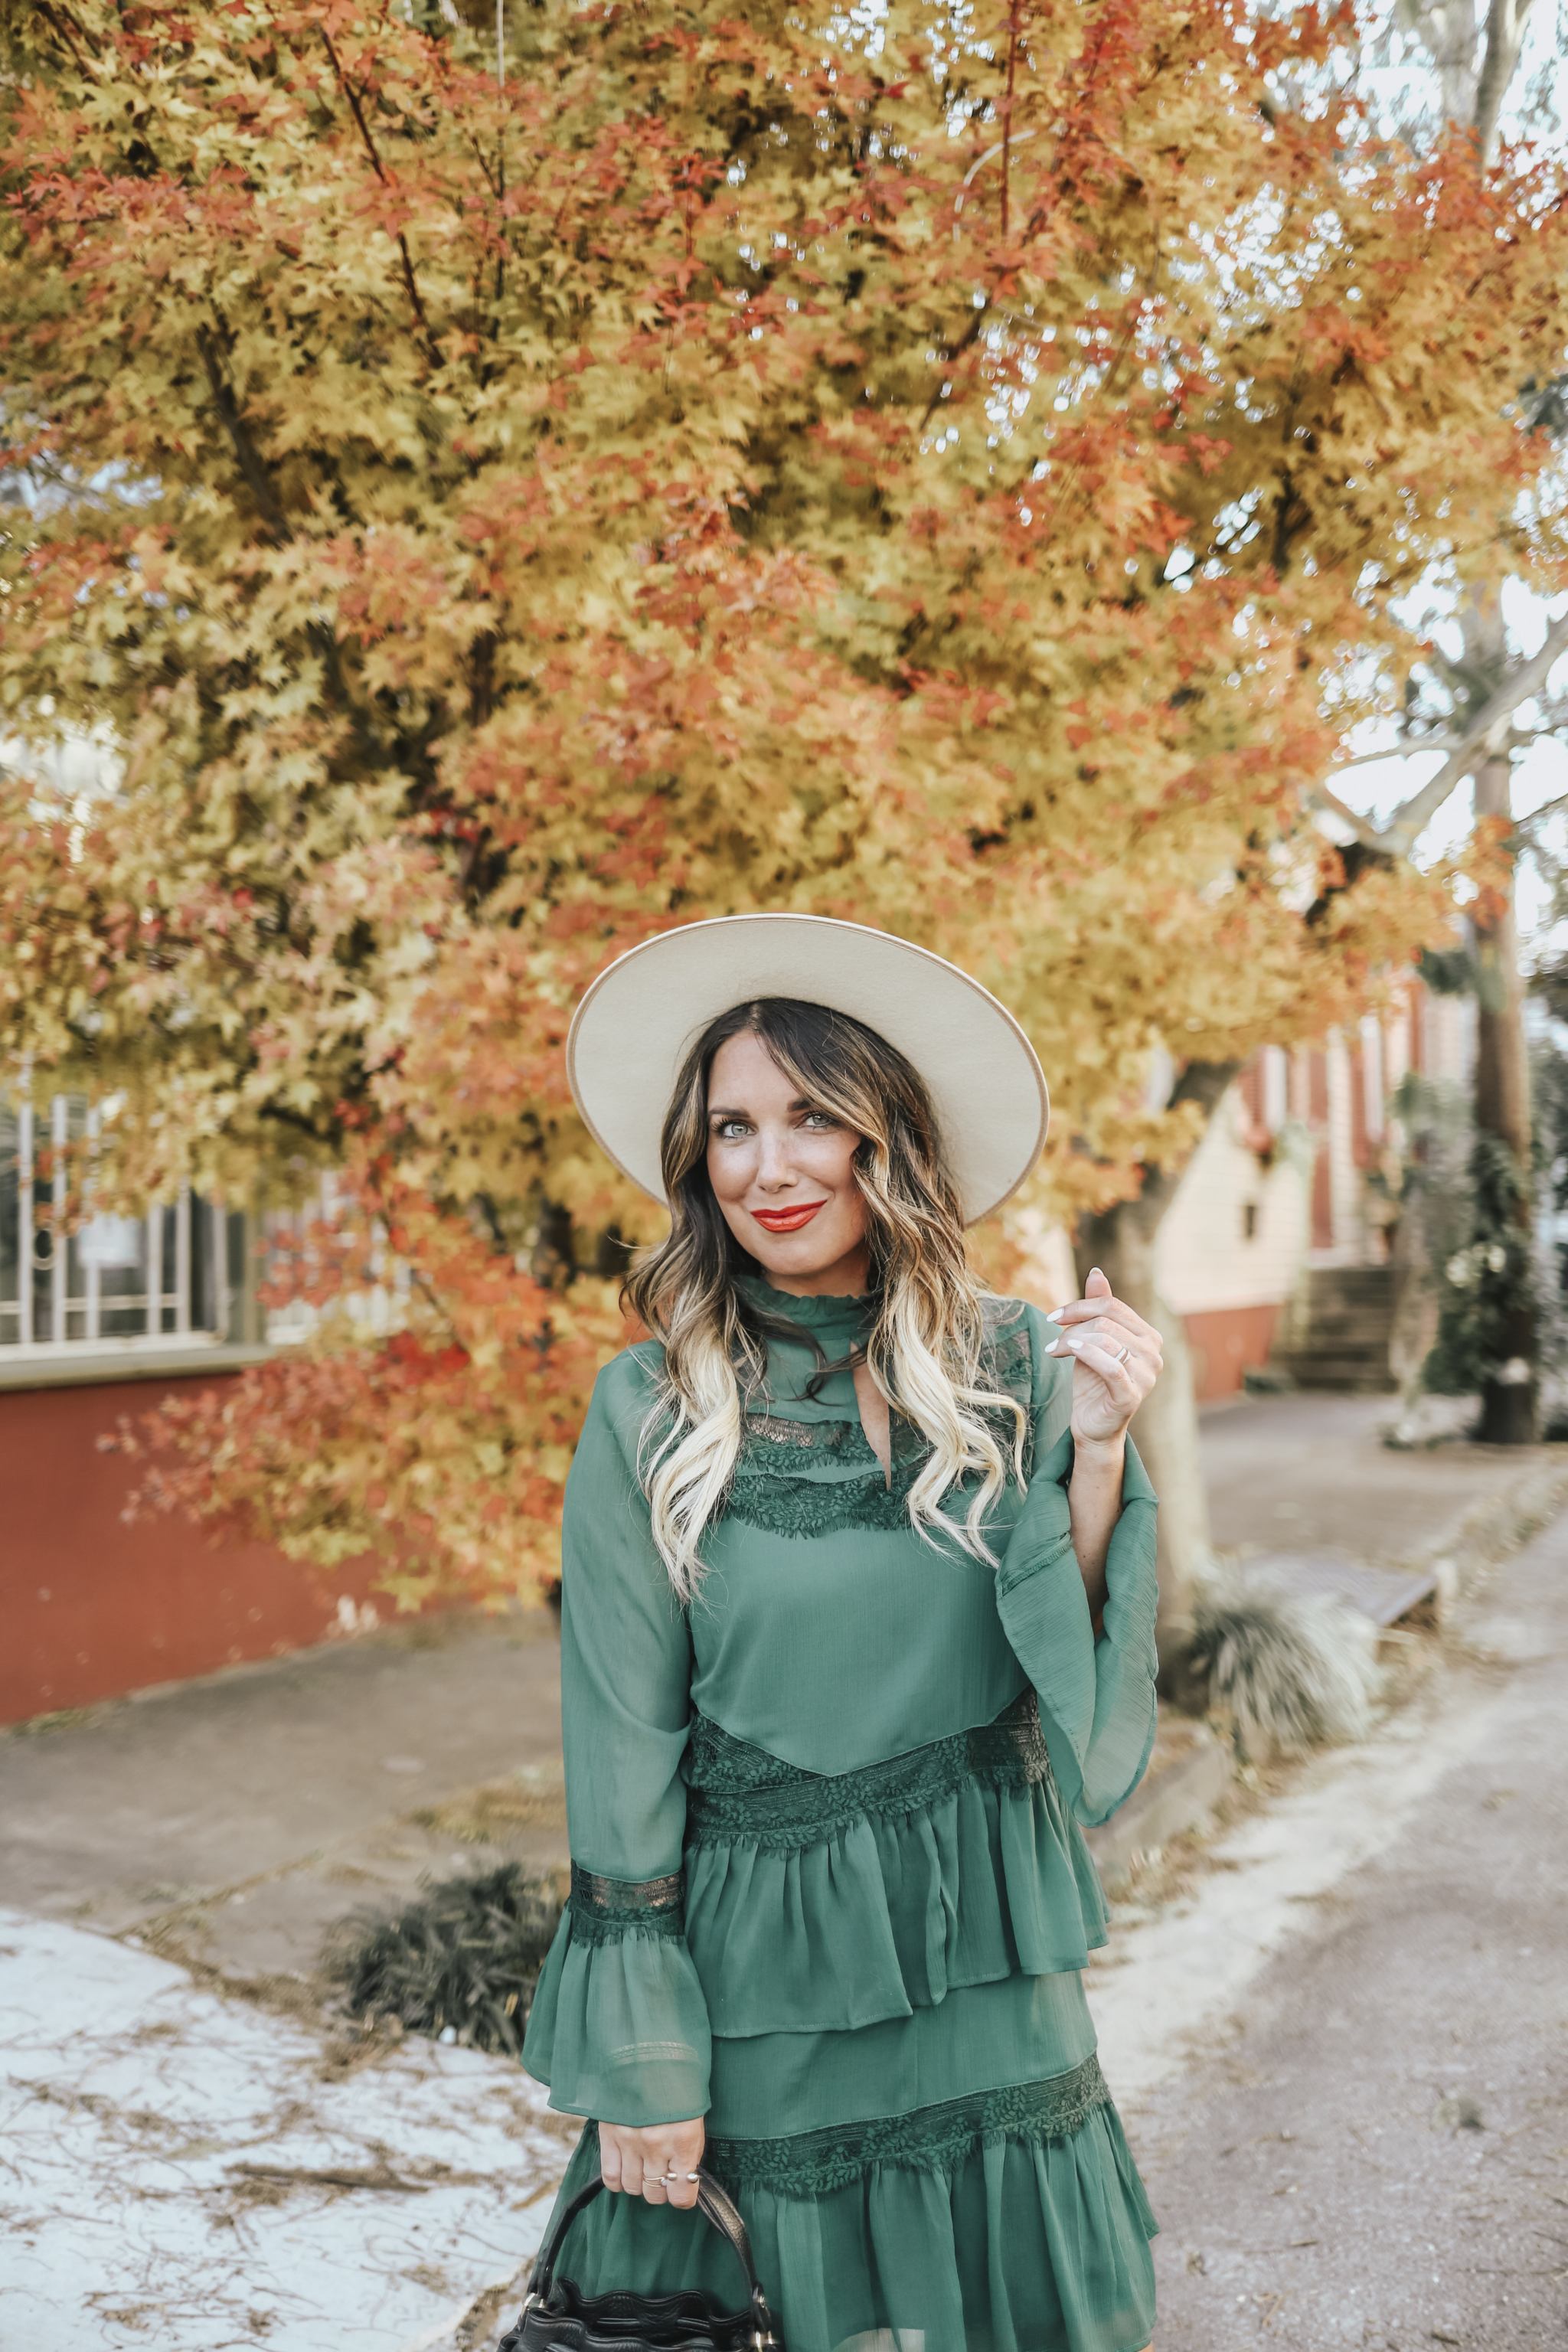 ROCKING A HAPPY FACE AND A HAPPY, GREEN DRESS FROM RIVER ISLAND. FOUND THE PERFECT HOLIDAY DRESSES AND WHITE BOOTIES. READ MORE ON THE BLOG.